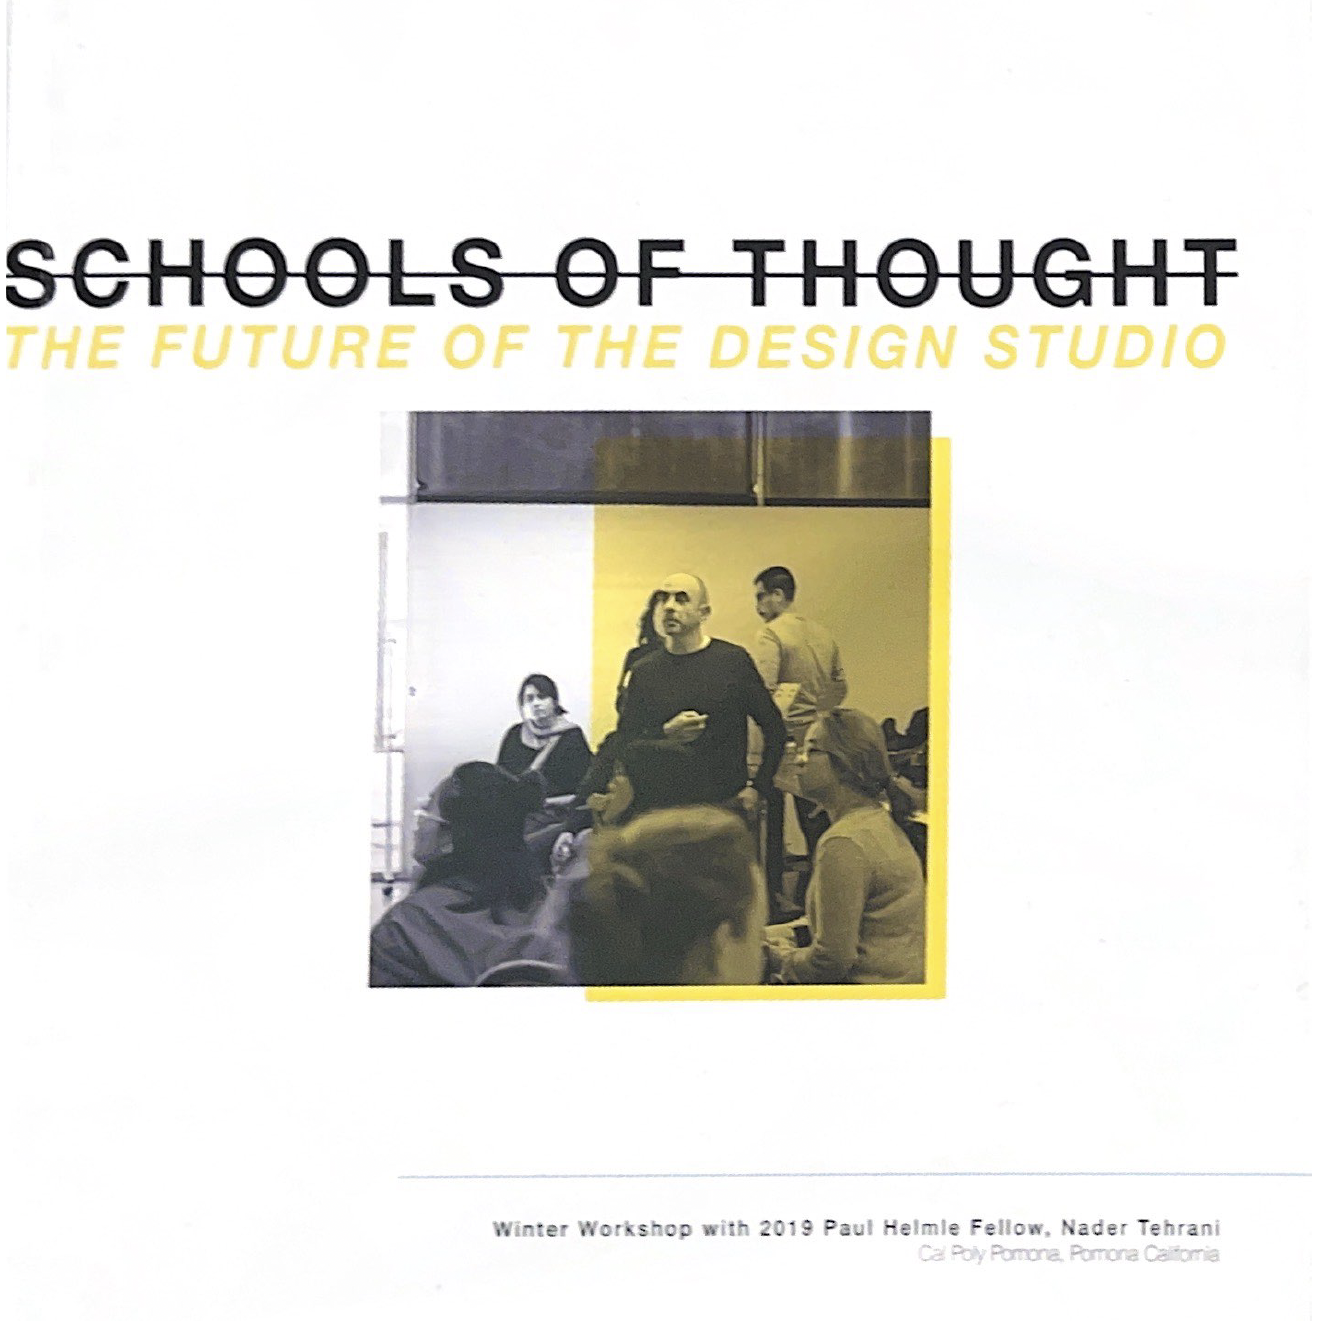 Schools of Thought: The Future of the Design Studio Winter Workshop with 2019 Paul Hello Fellow, Nader Tehrani : Image description: White and yellow book with title schools of thought